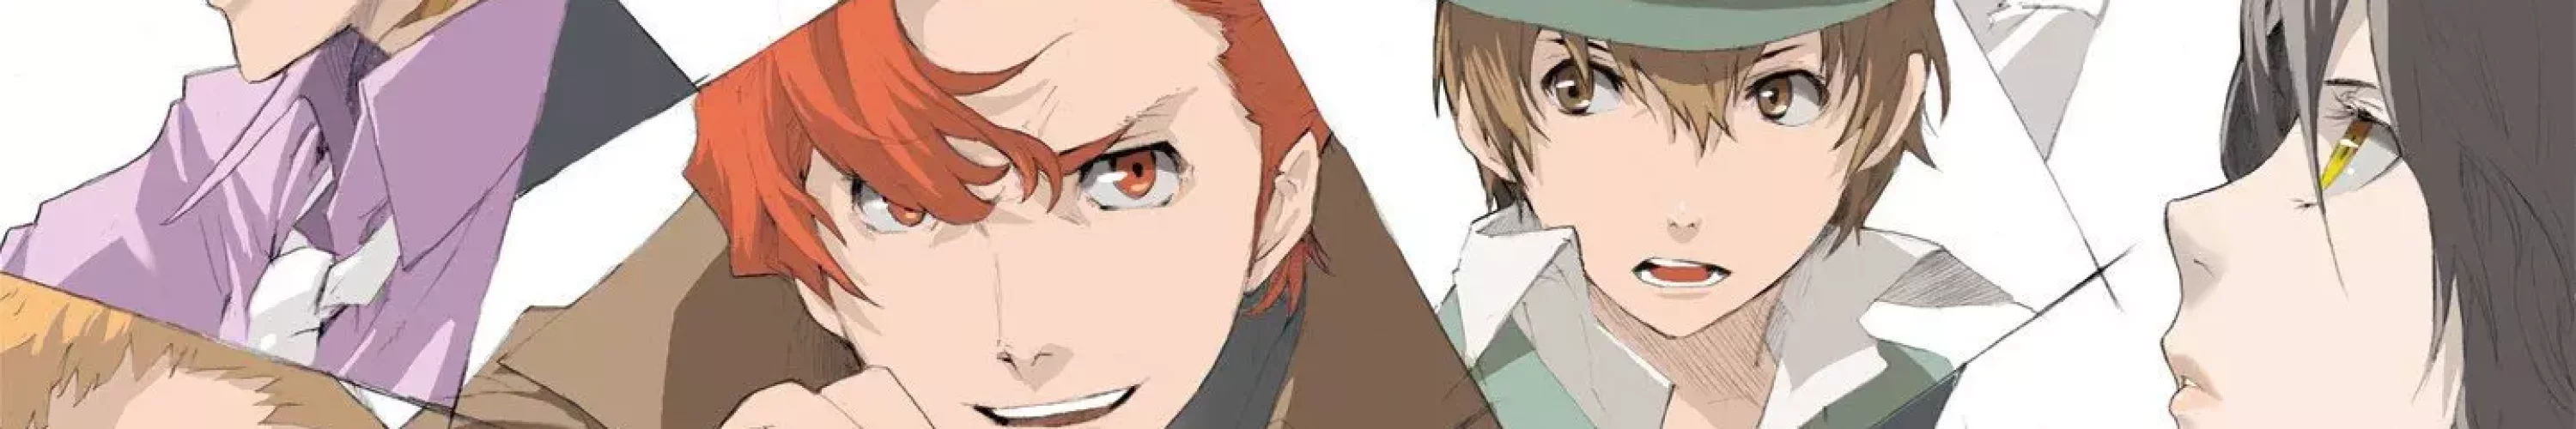 baccano-faces-characters-young-man